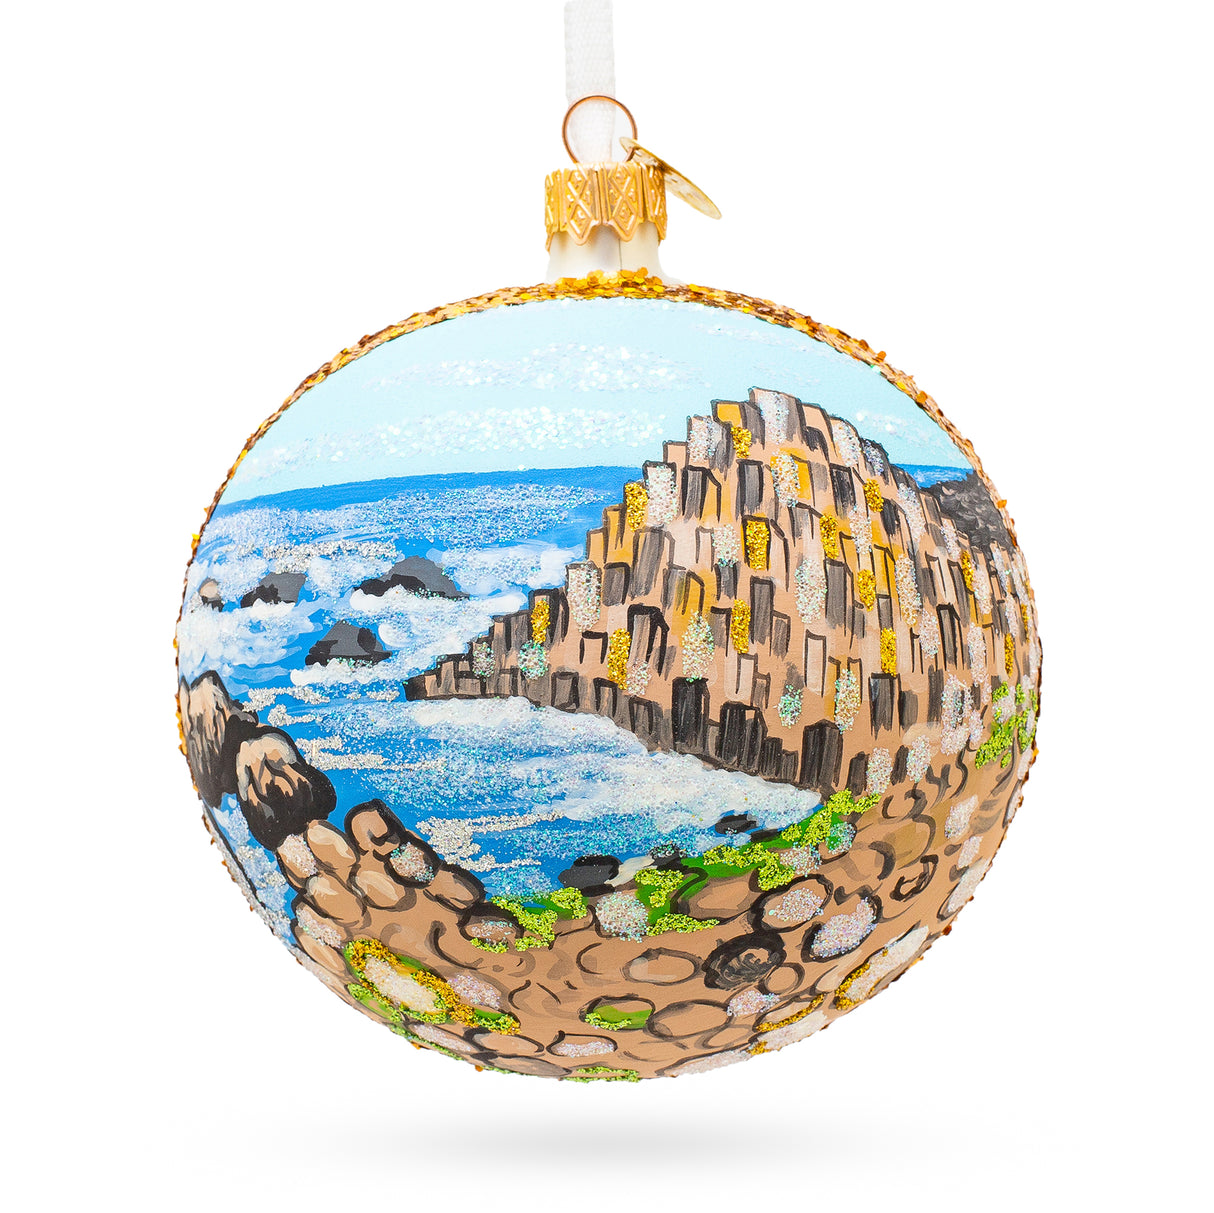 Glass Giant's Causeway, Northern Ireland, United Kingdom Glass Ball Christmas Ornament 4 Inches in Multi color Round